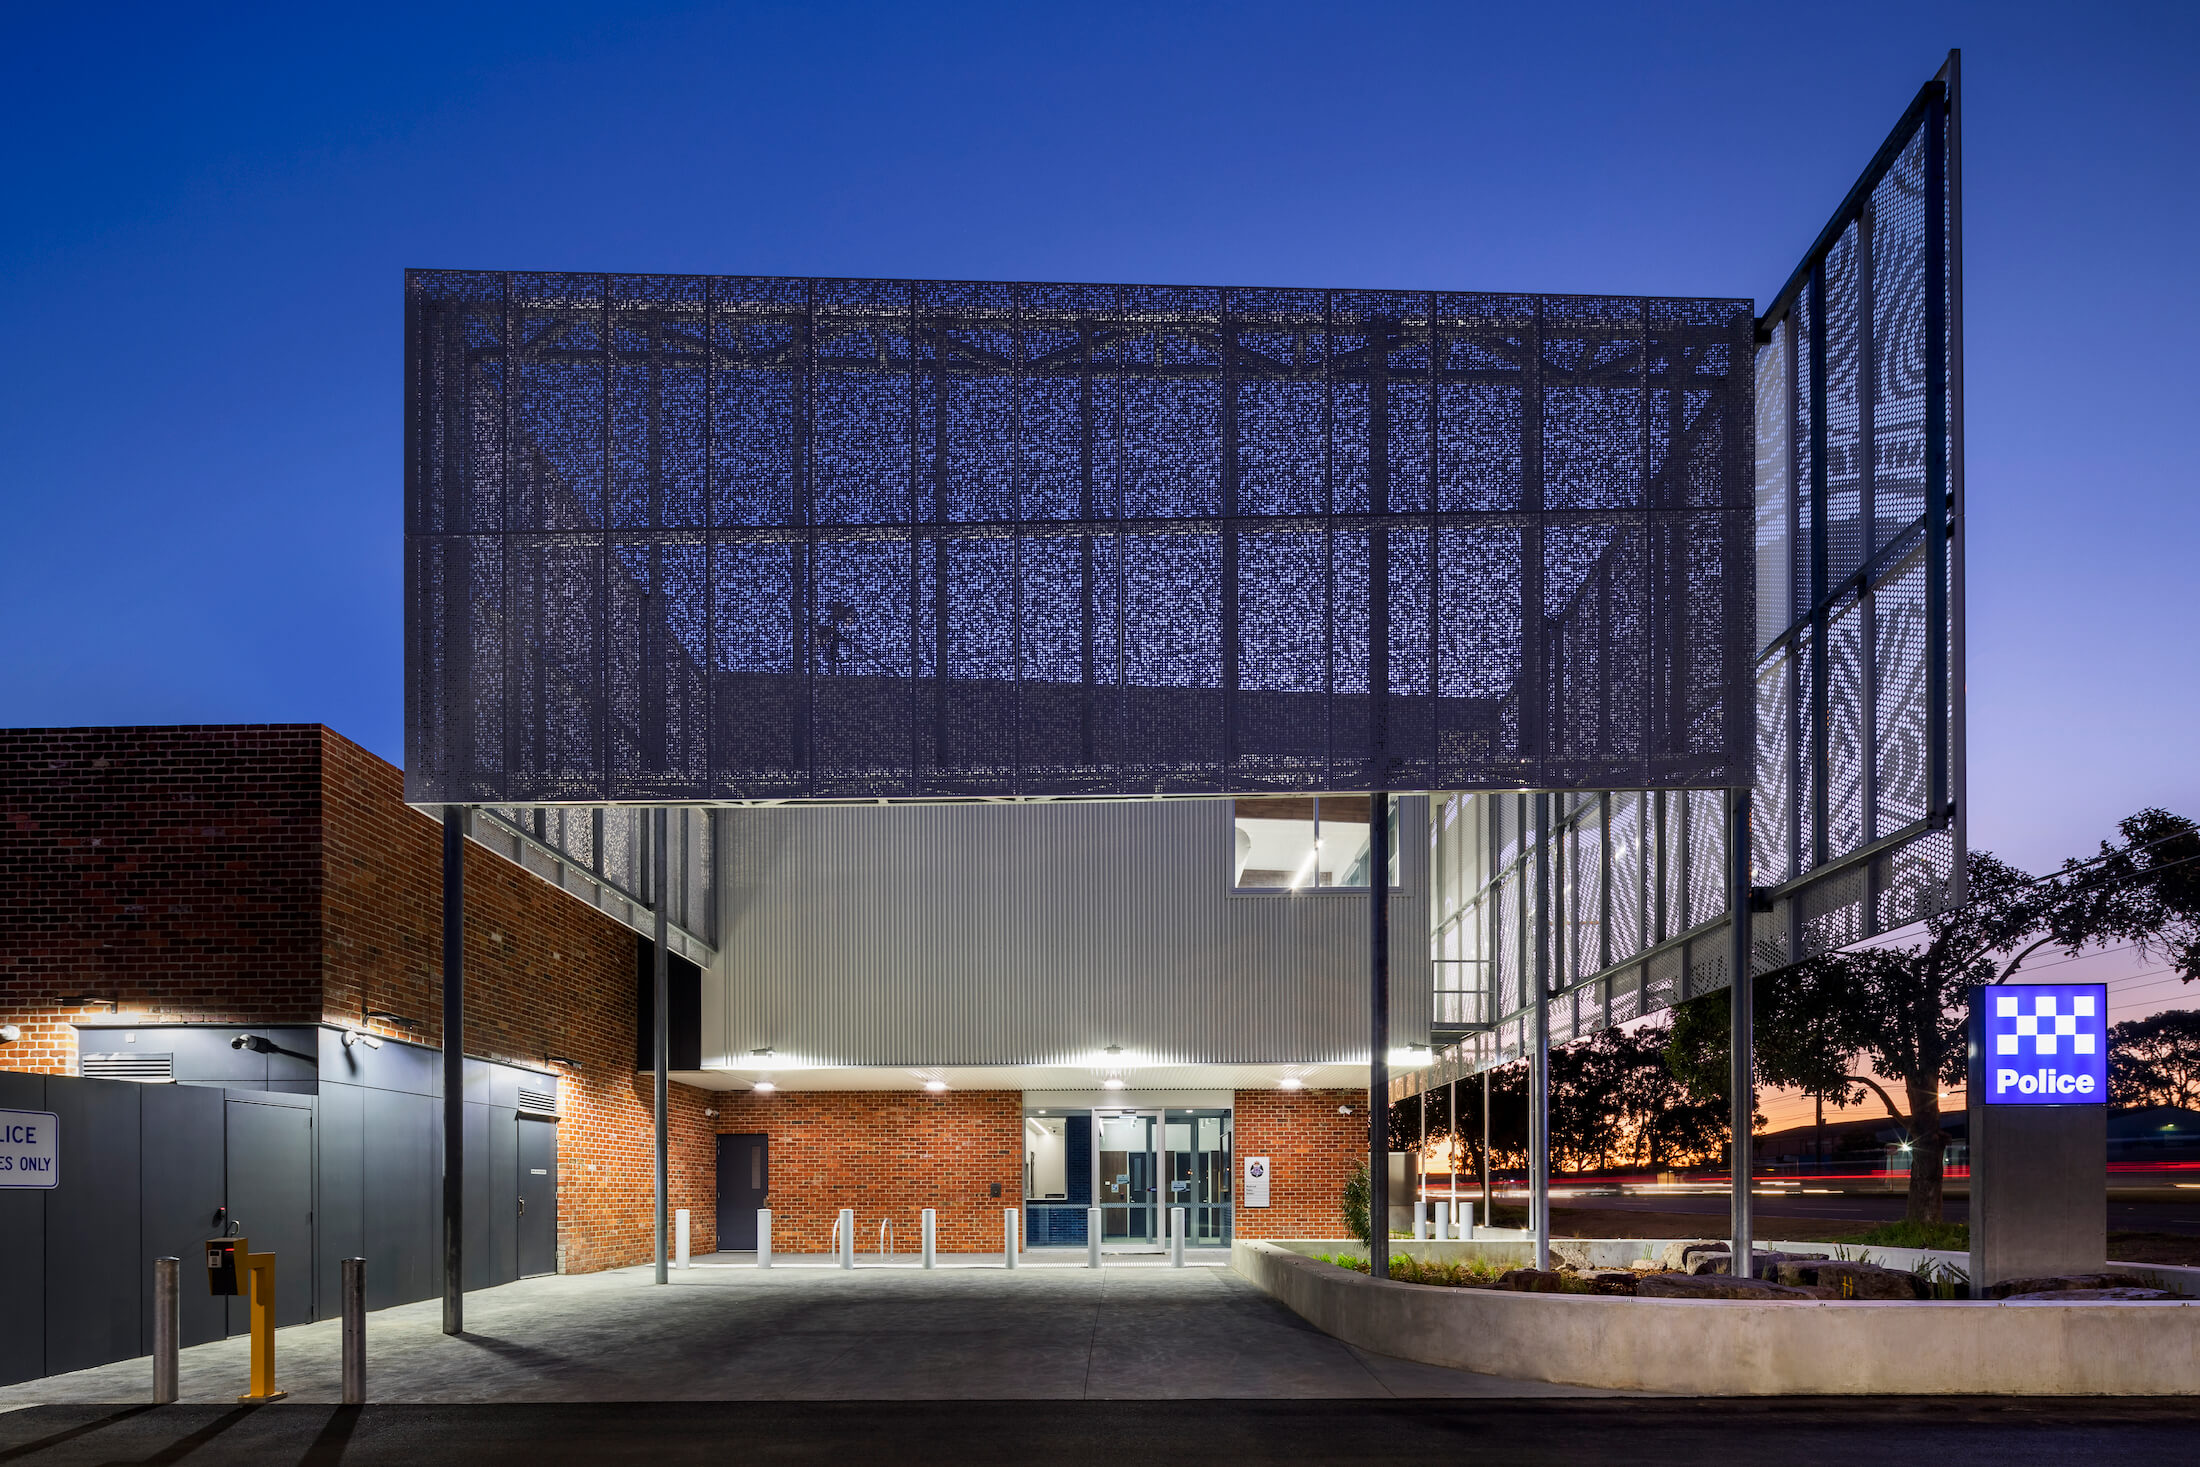 Perforated steel screen facade over police station forecourt at night